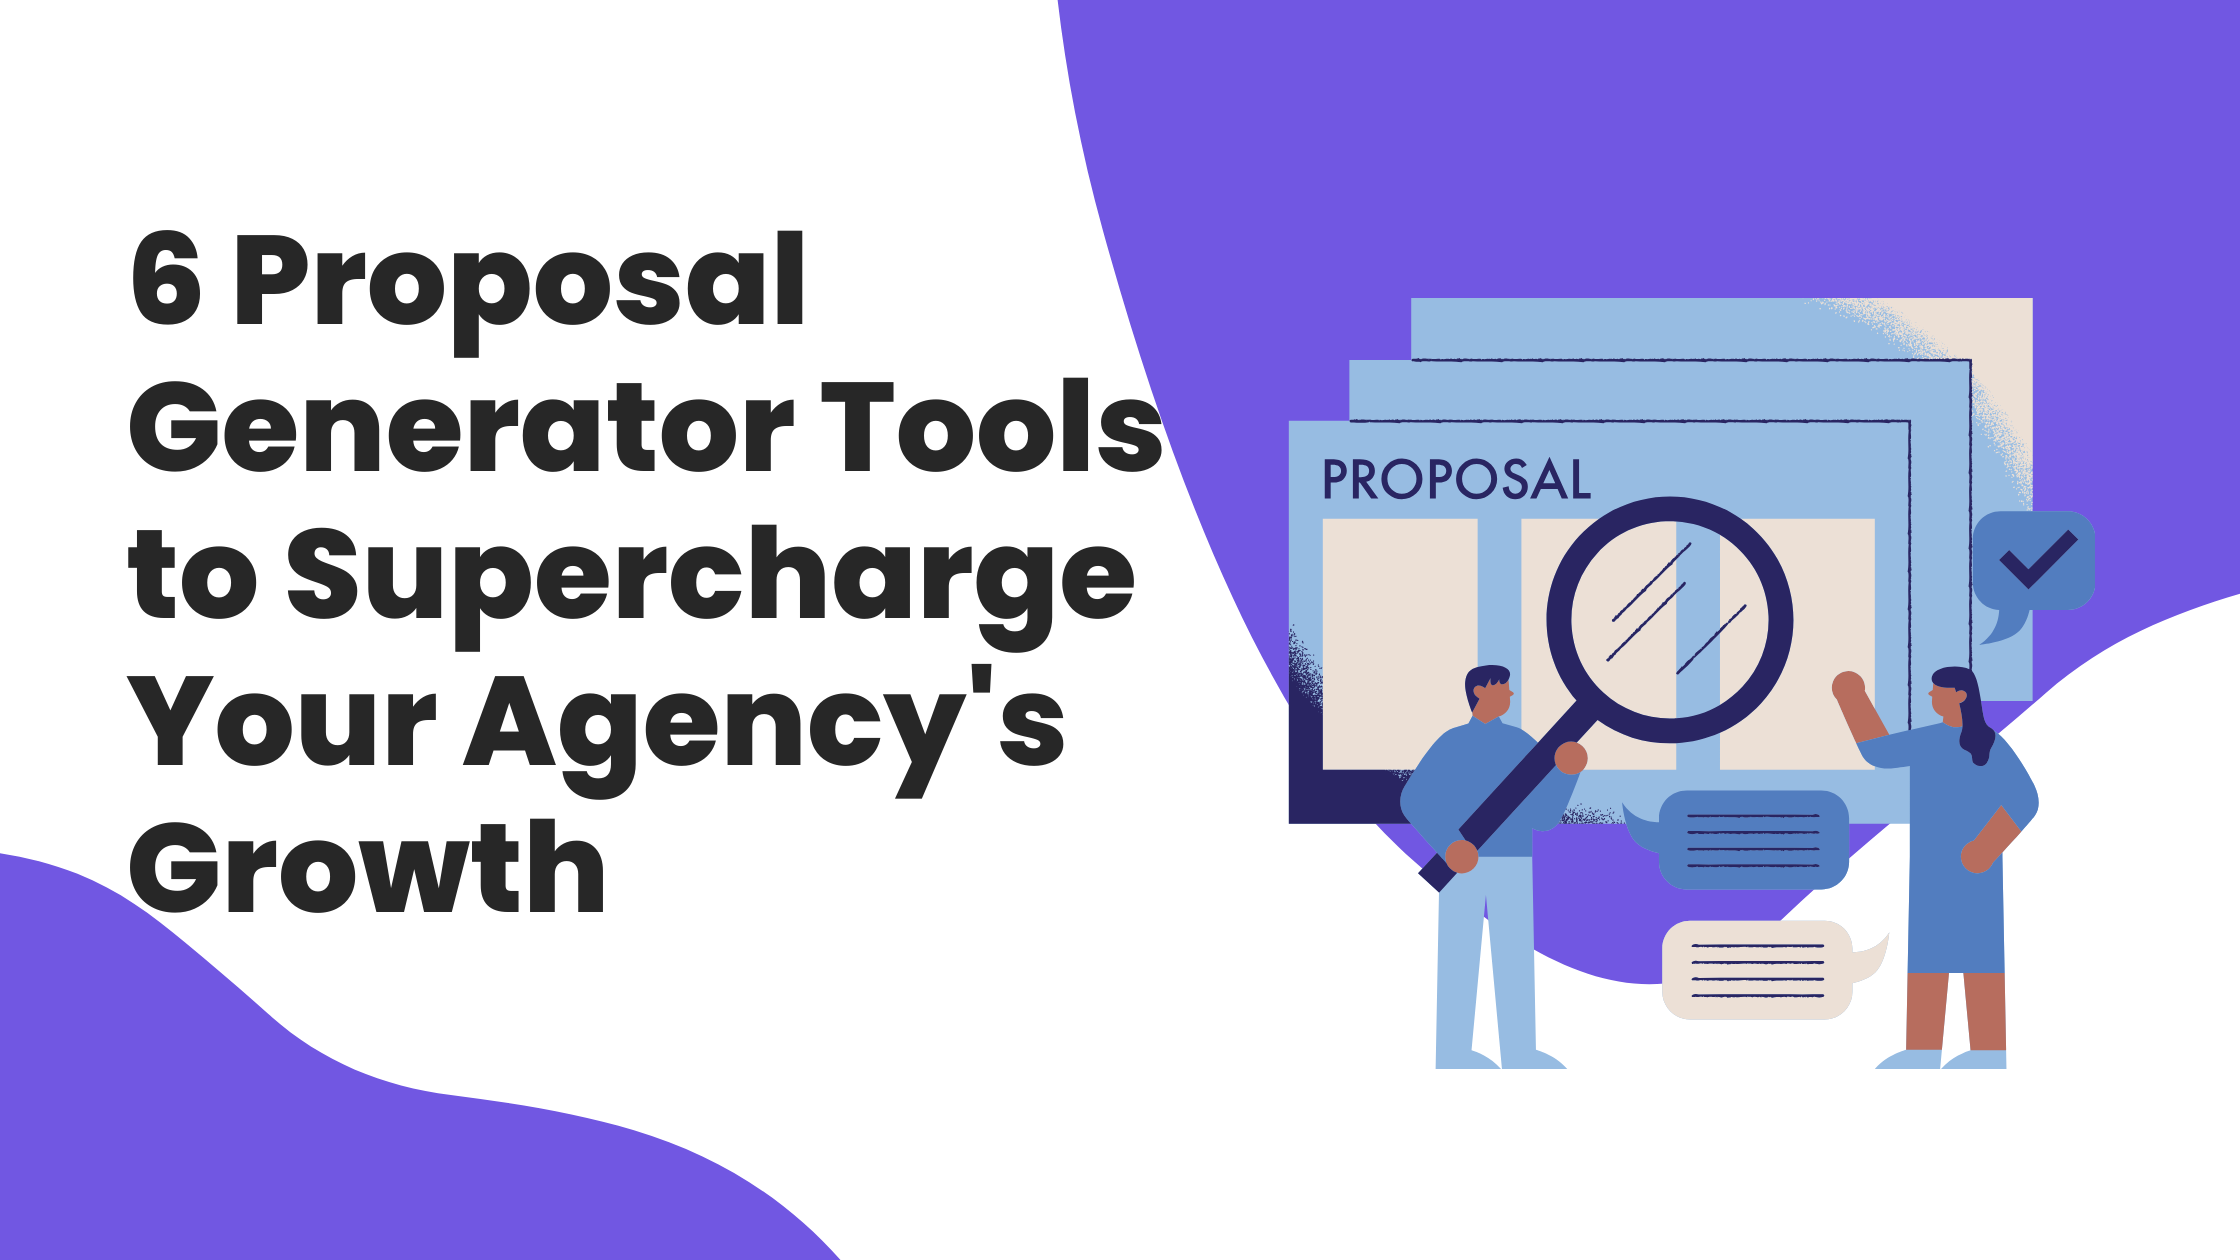 6 Proposal Generator Tools to Supercharge Your Agency's Growth